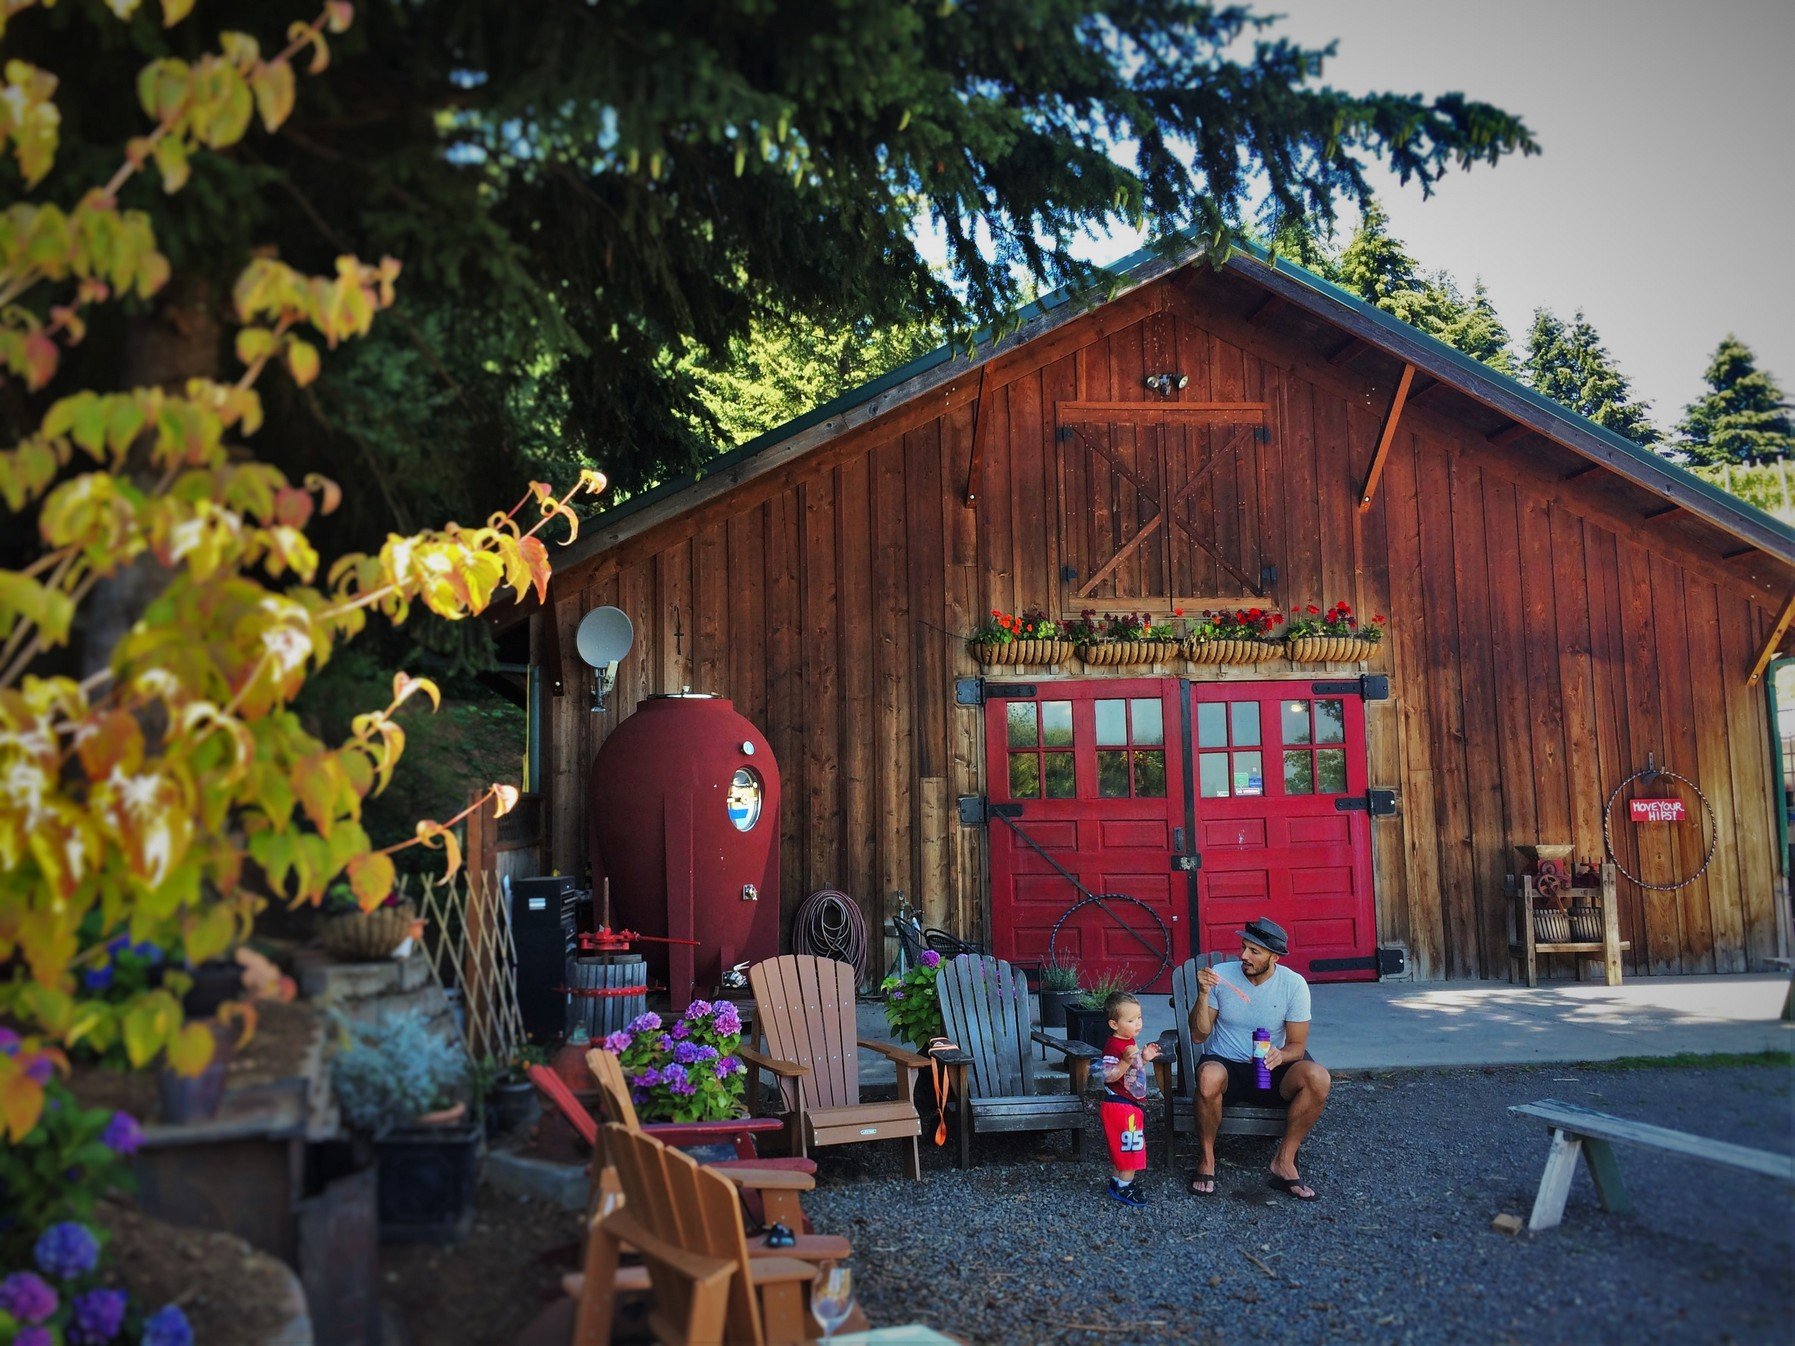 Rob Taylor and TinyMan Family Friendly wine tasting at AniChe Cellars Underwood Columbia River Gorge 2